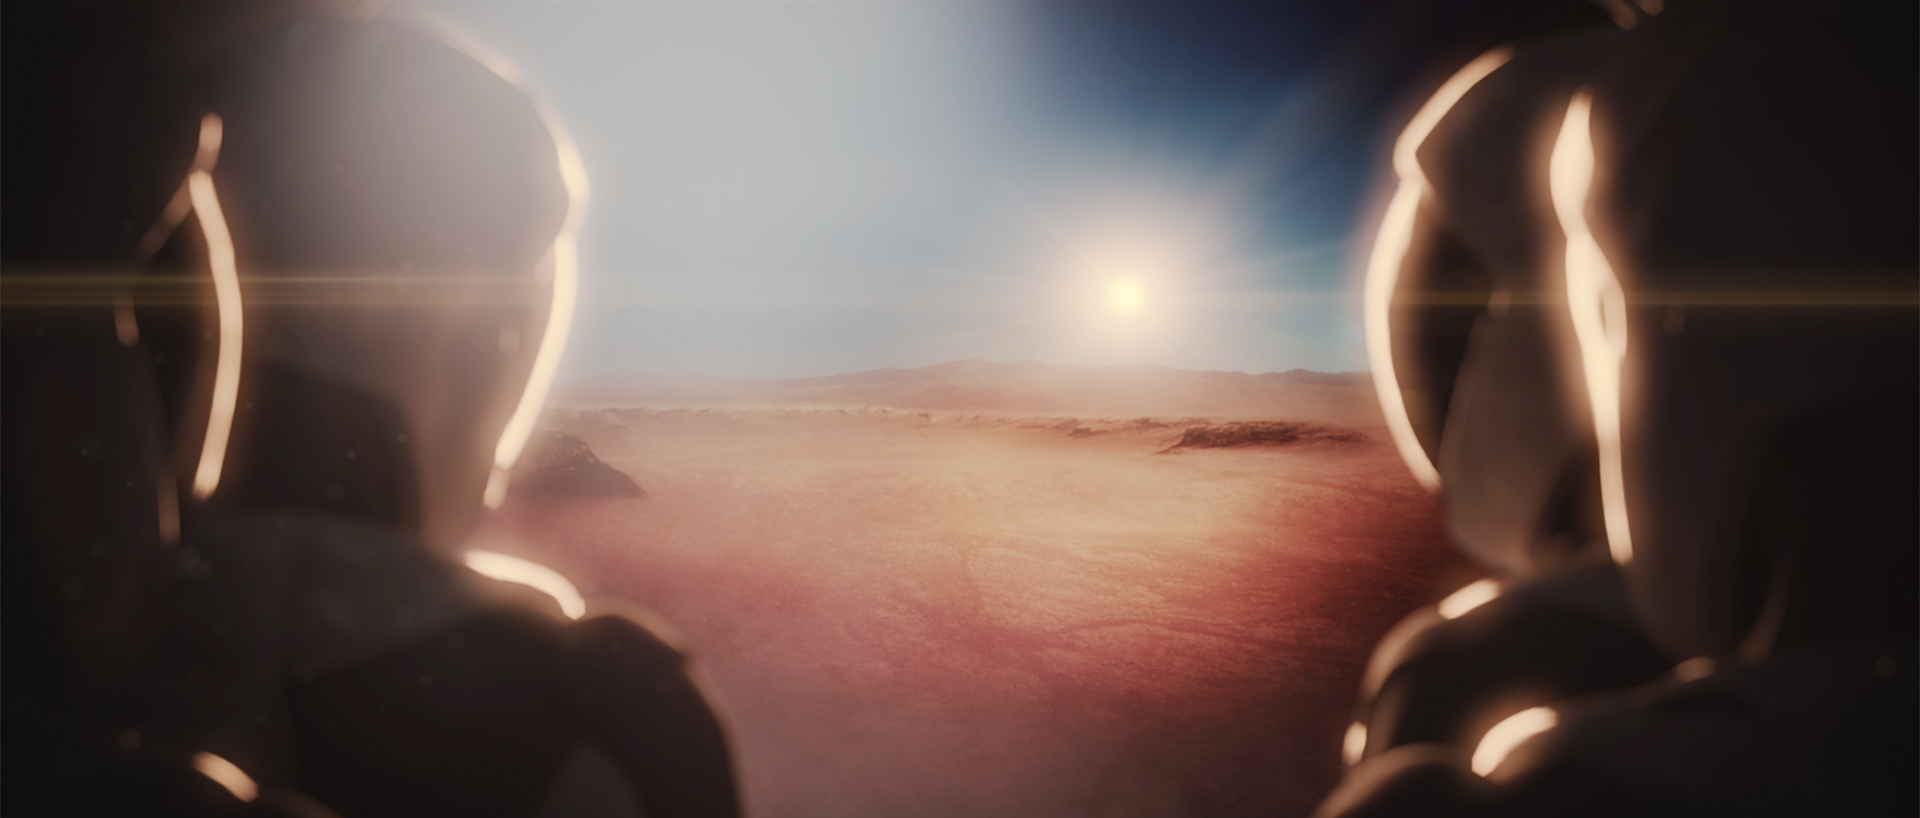 SpaceX Mars Missions: How They Plan to Colonize Mars